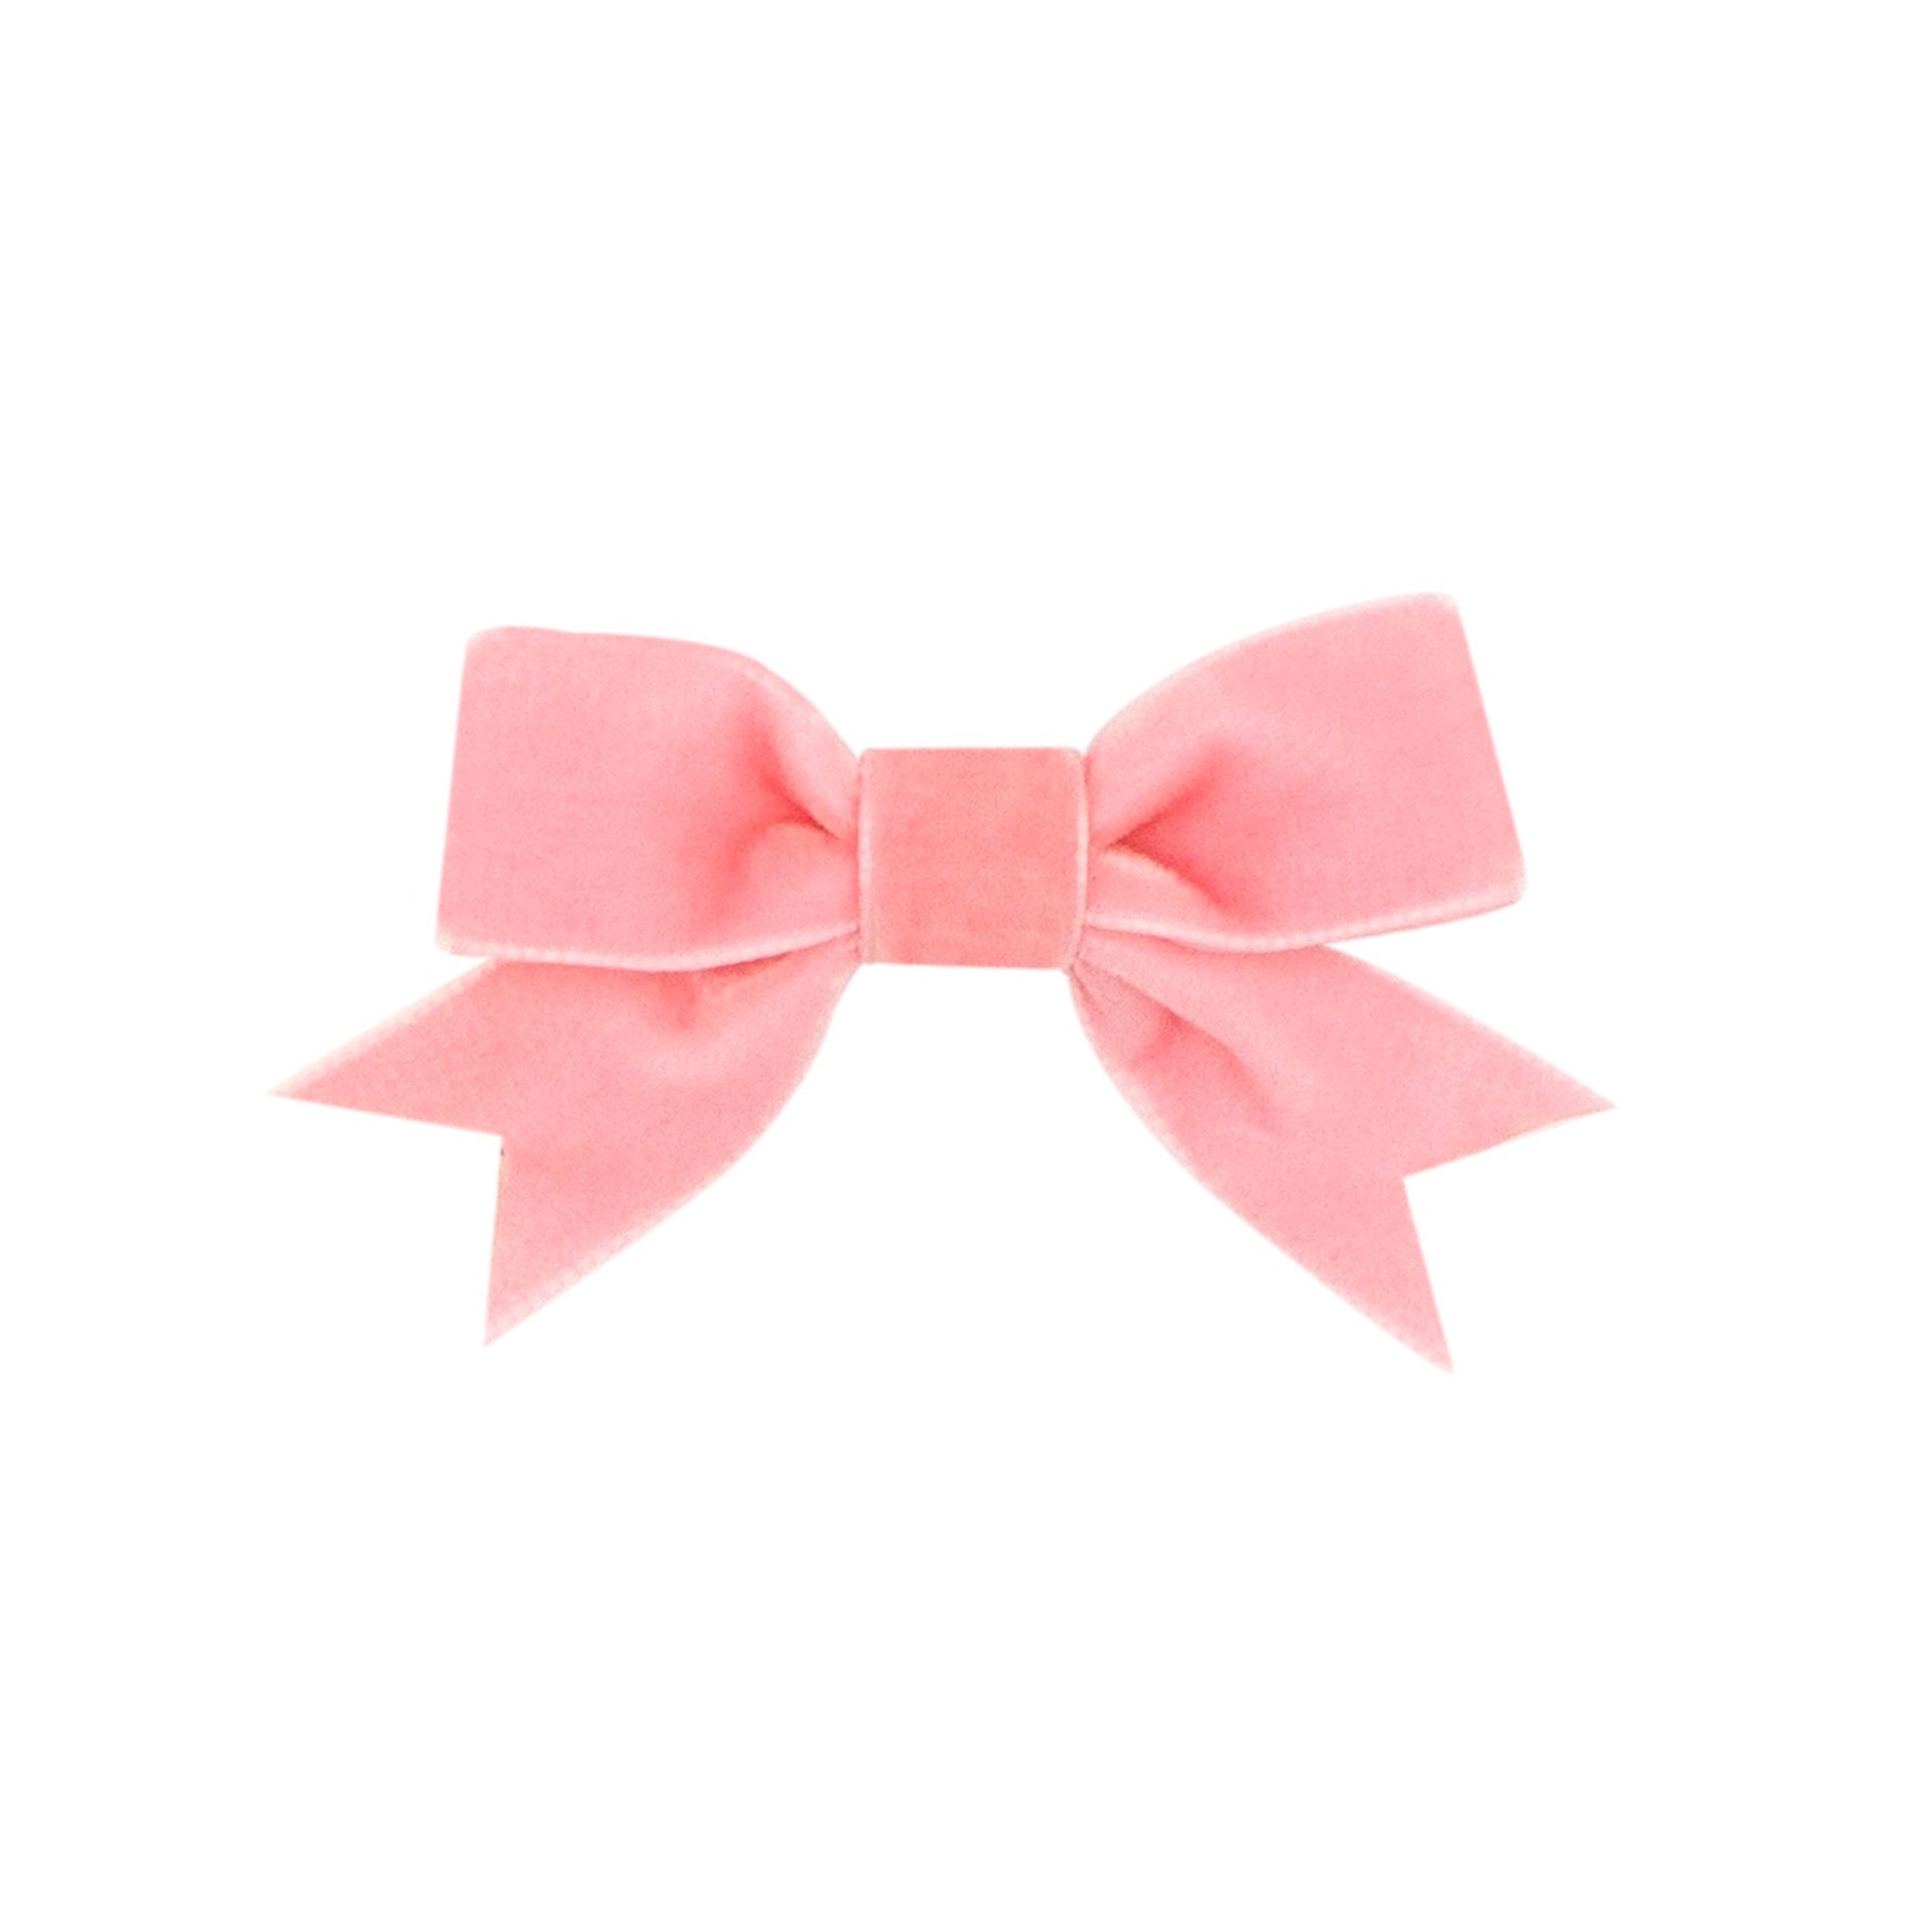 Wee Ones Mini Monogrammed Grosgrain Girls Hair Bow - Light Pink with Hot Pink Initial W